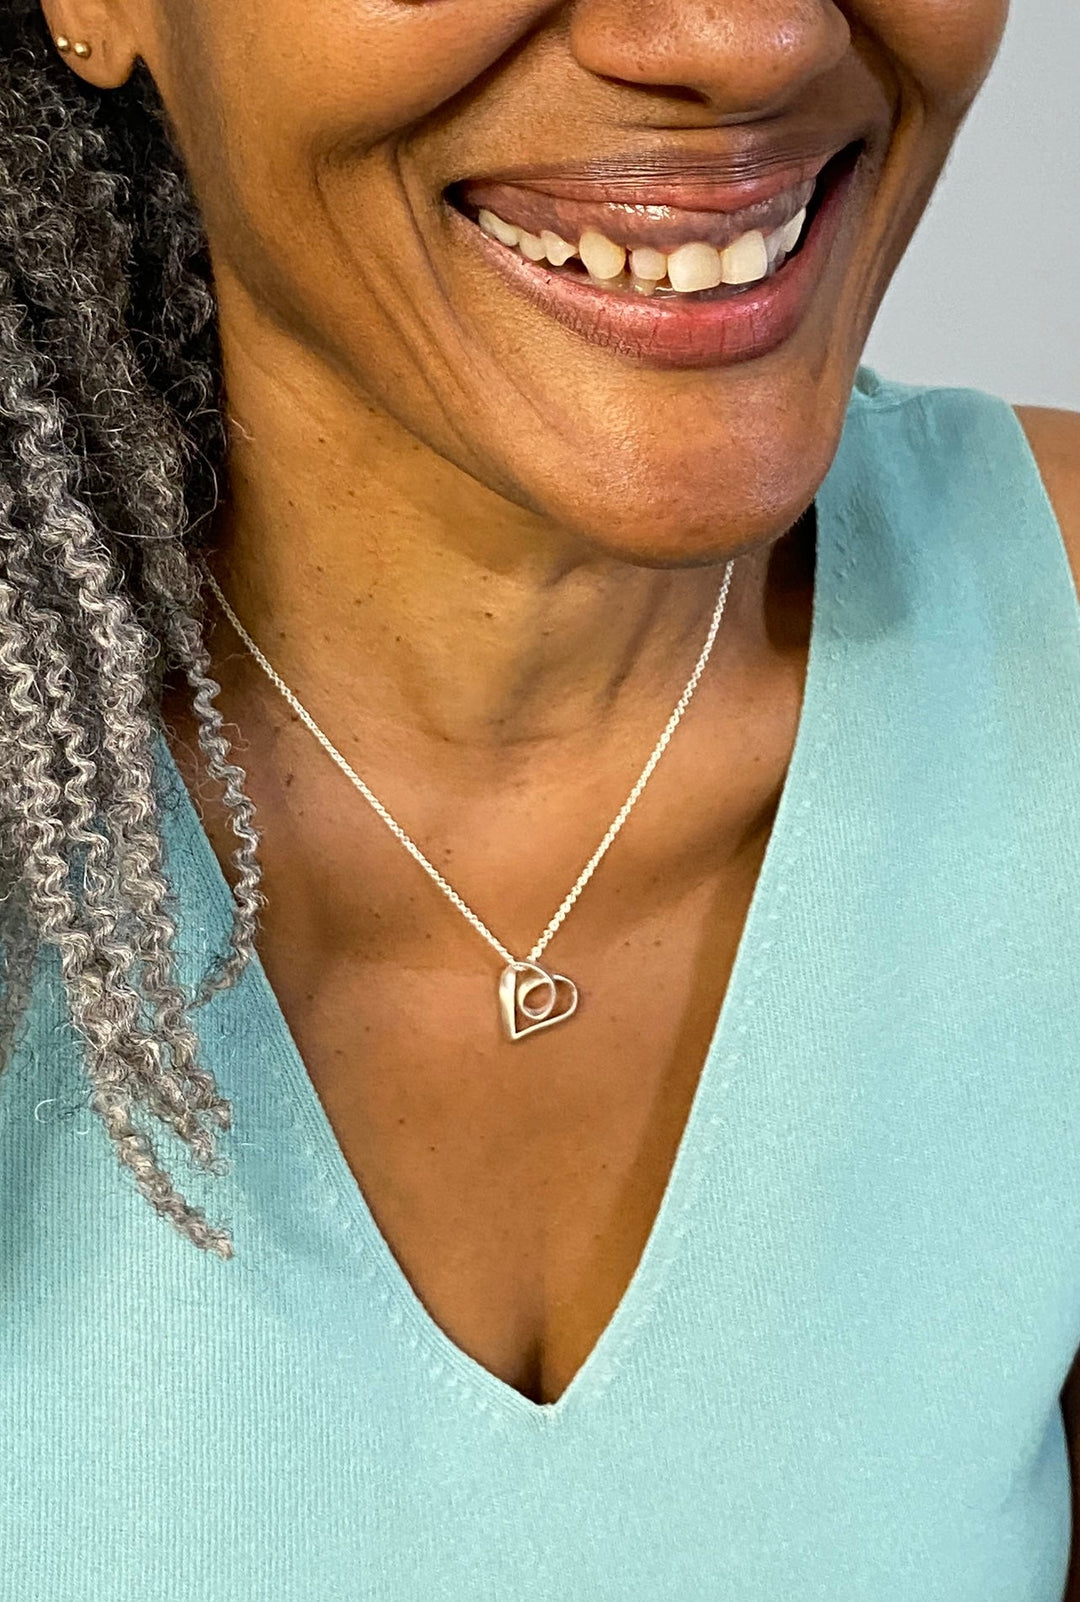 Smiling woman wearing Sue Beatrice’s Möbius Heart: Timeless Symbol of Love in Sterling Silver